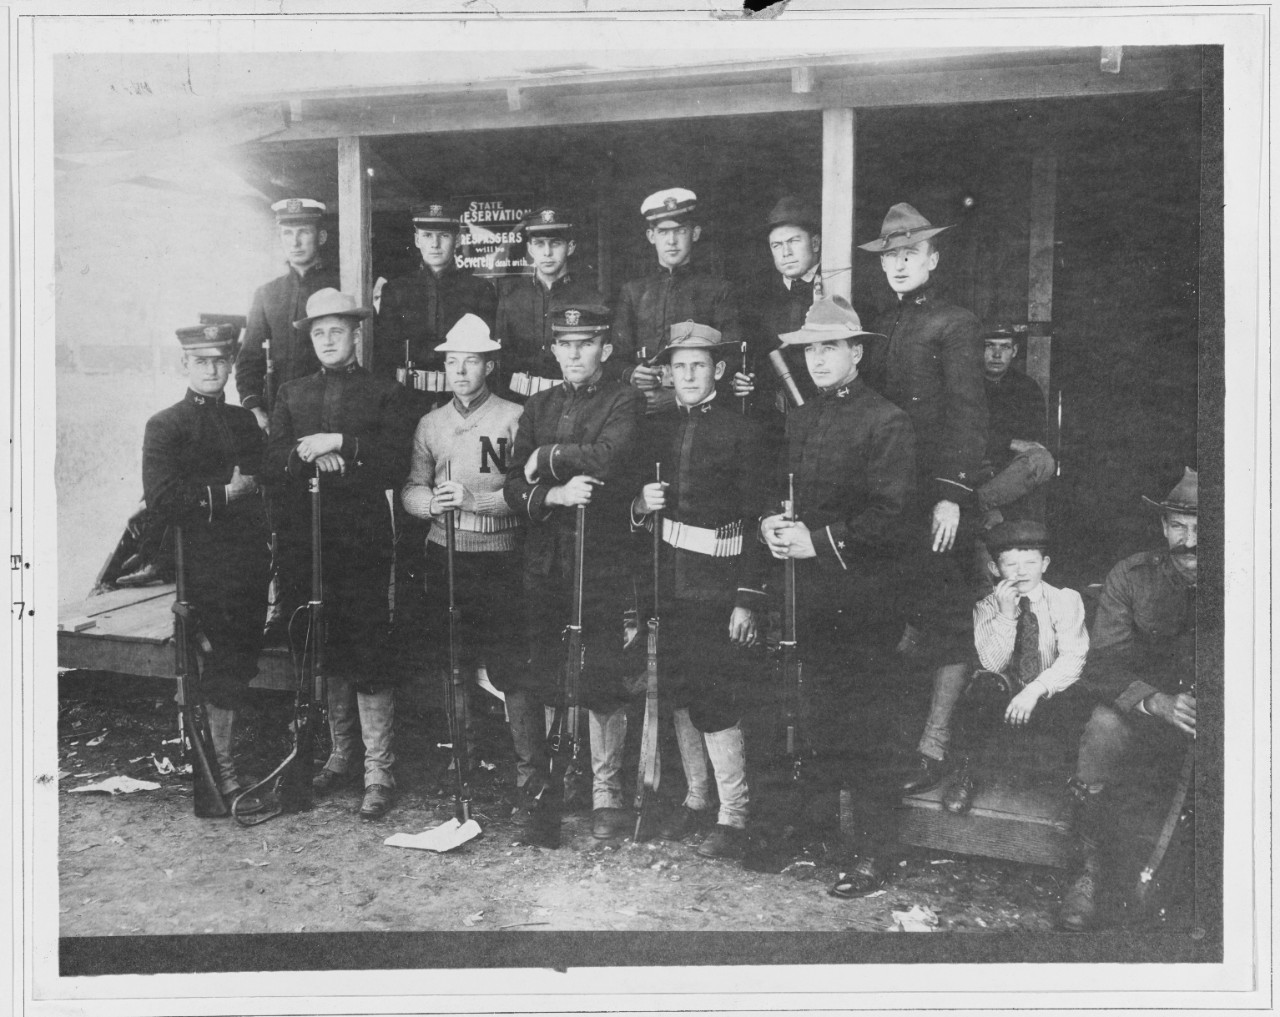 Photo #: NH 74113  U.S. Navy rifle team that first won the Auckland Cup